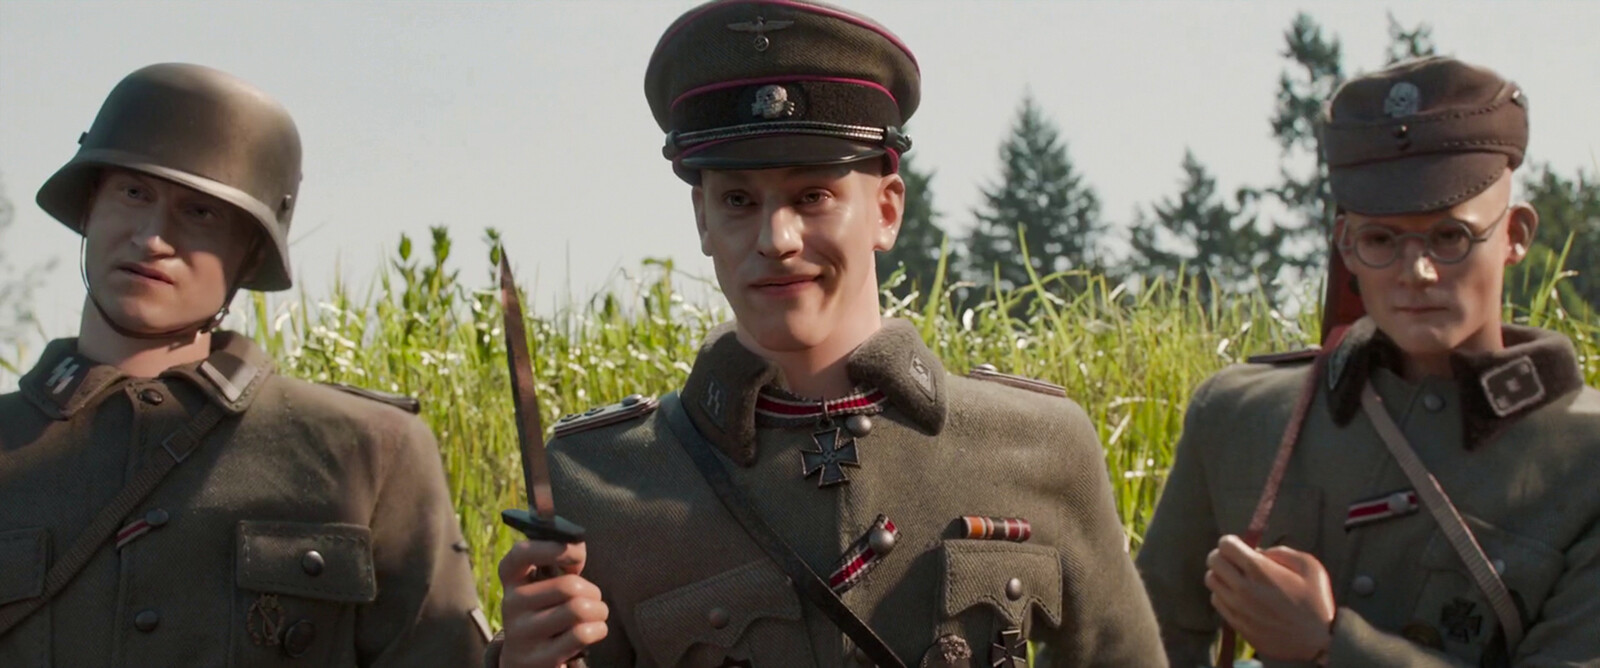 Welcome to Marwen - 2018.